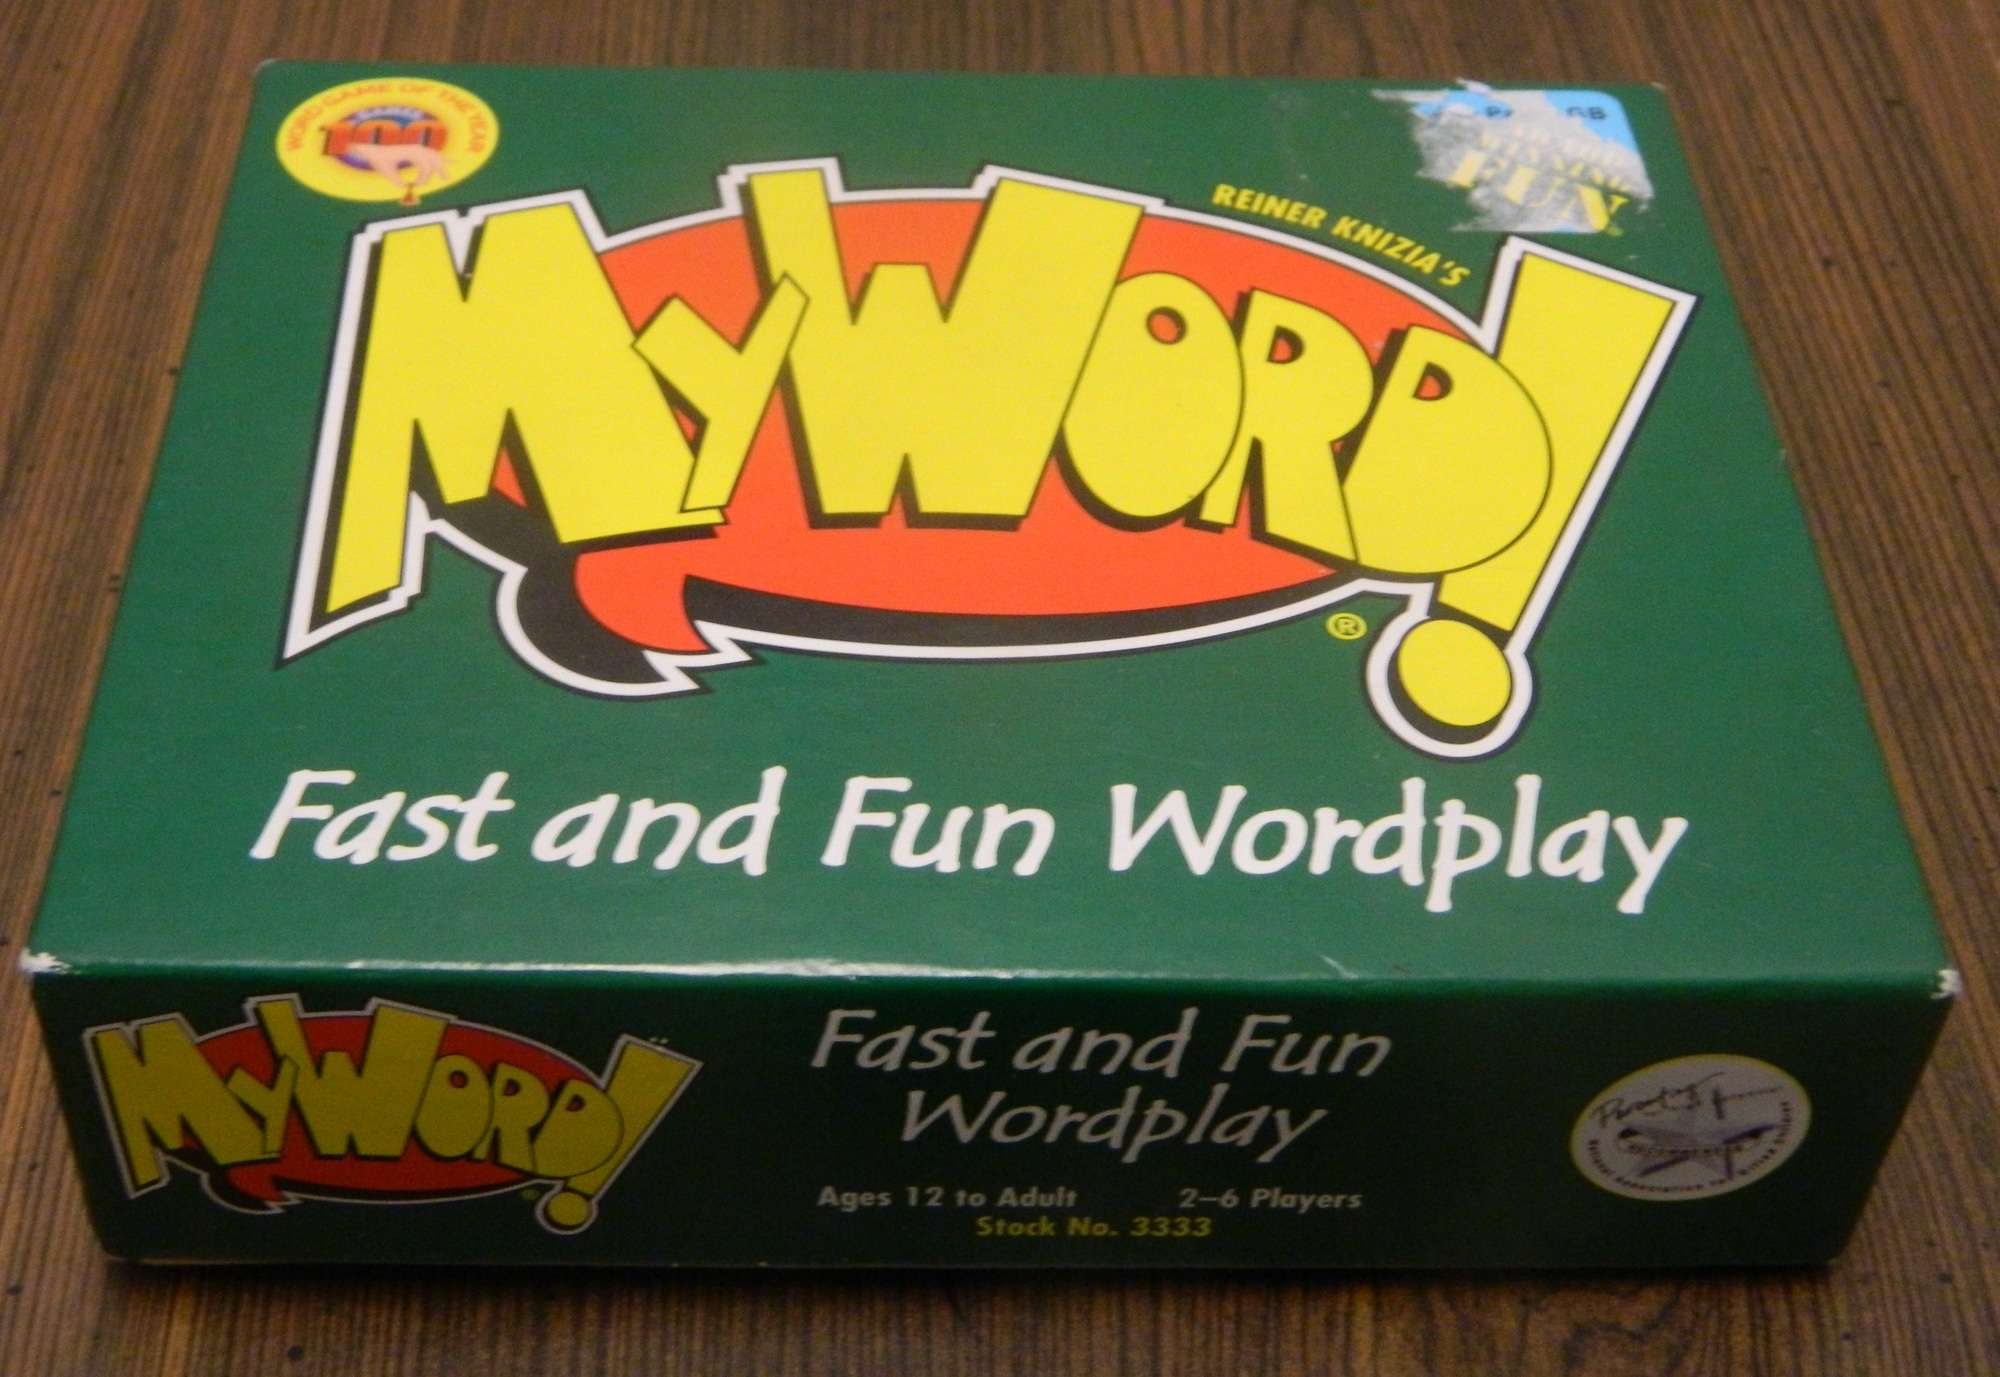 My Word! Card Game Review and Instructions